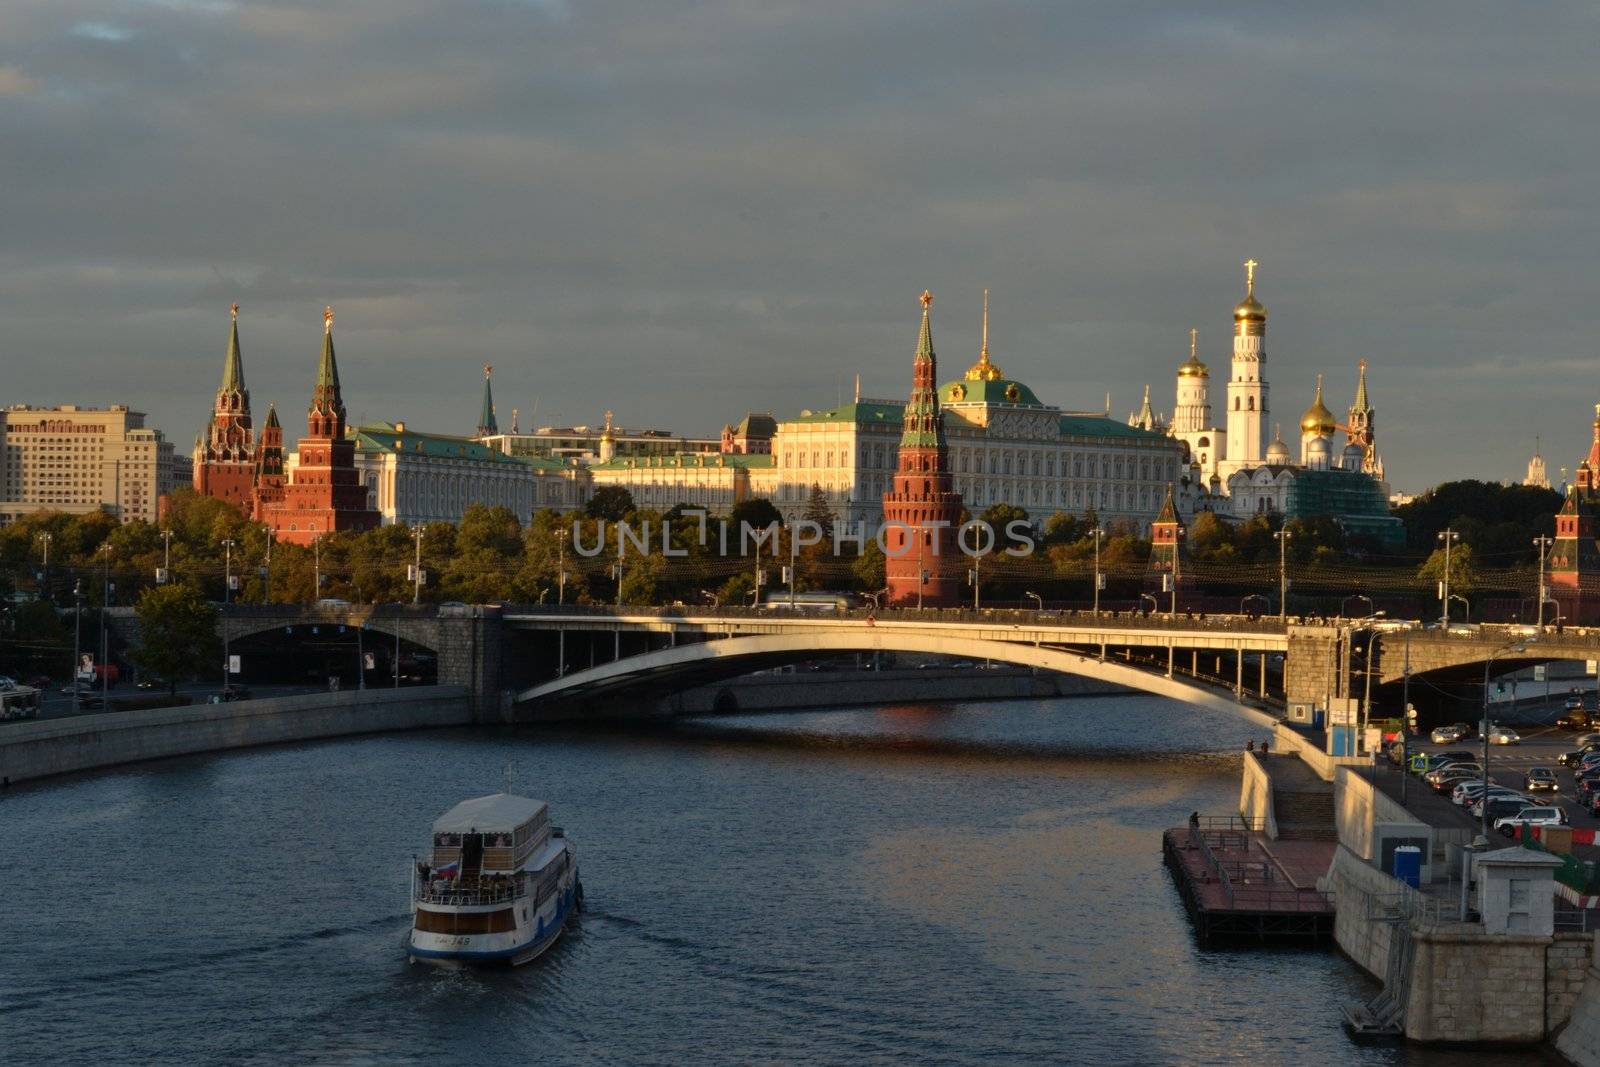 The Moscow river in the evening by Autre